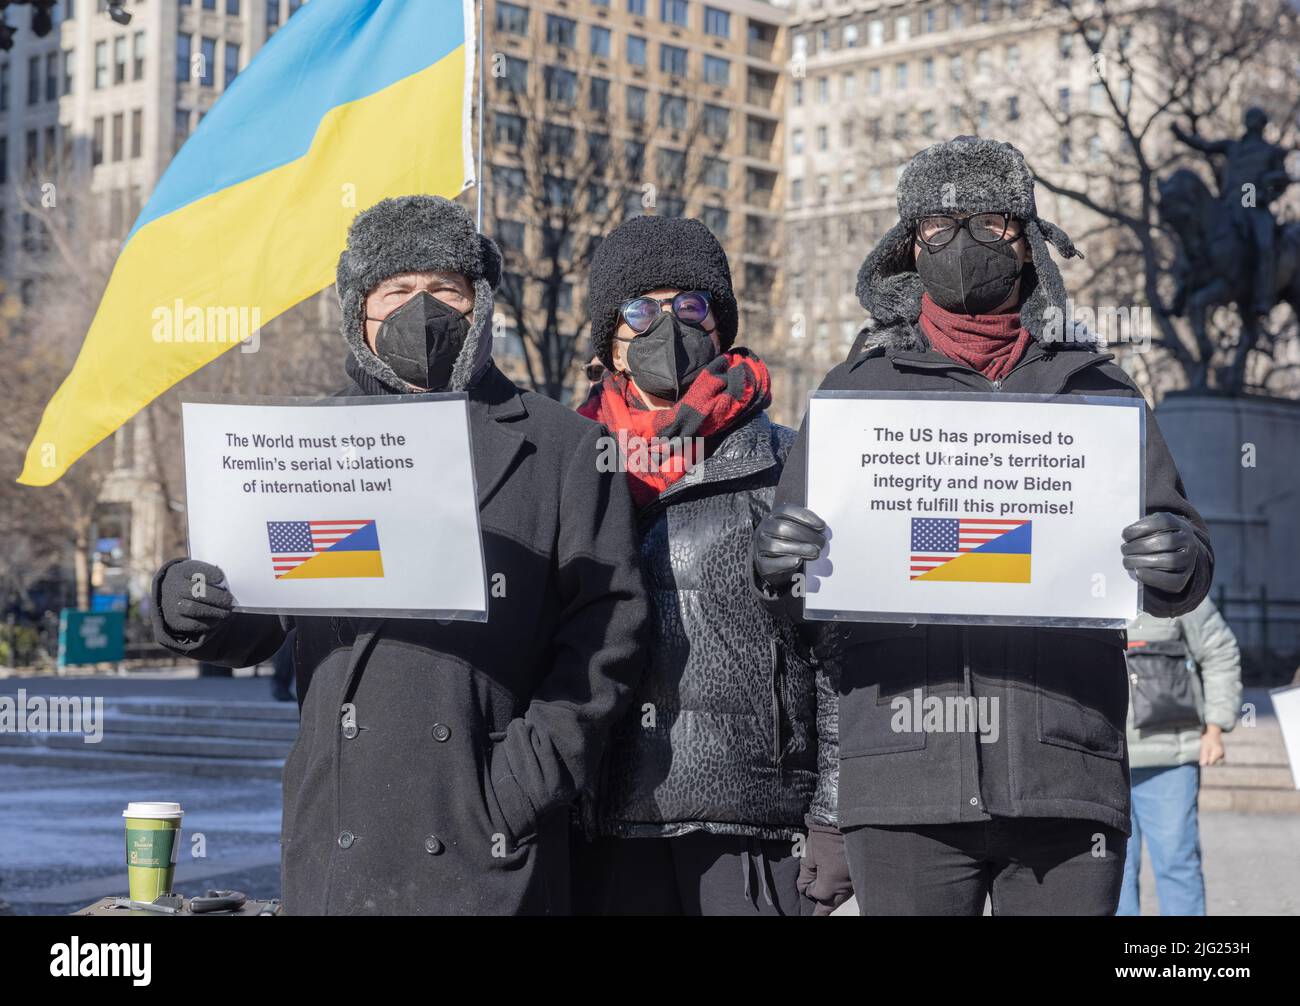 NEW YORK, N.Y. – January 22, 2022: Demonstrators are seen in New York City’s Union Square Park during a rally in support of Ukraine. Stock Photo